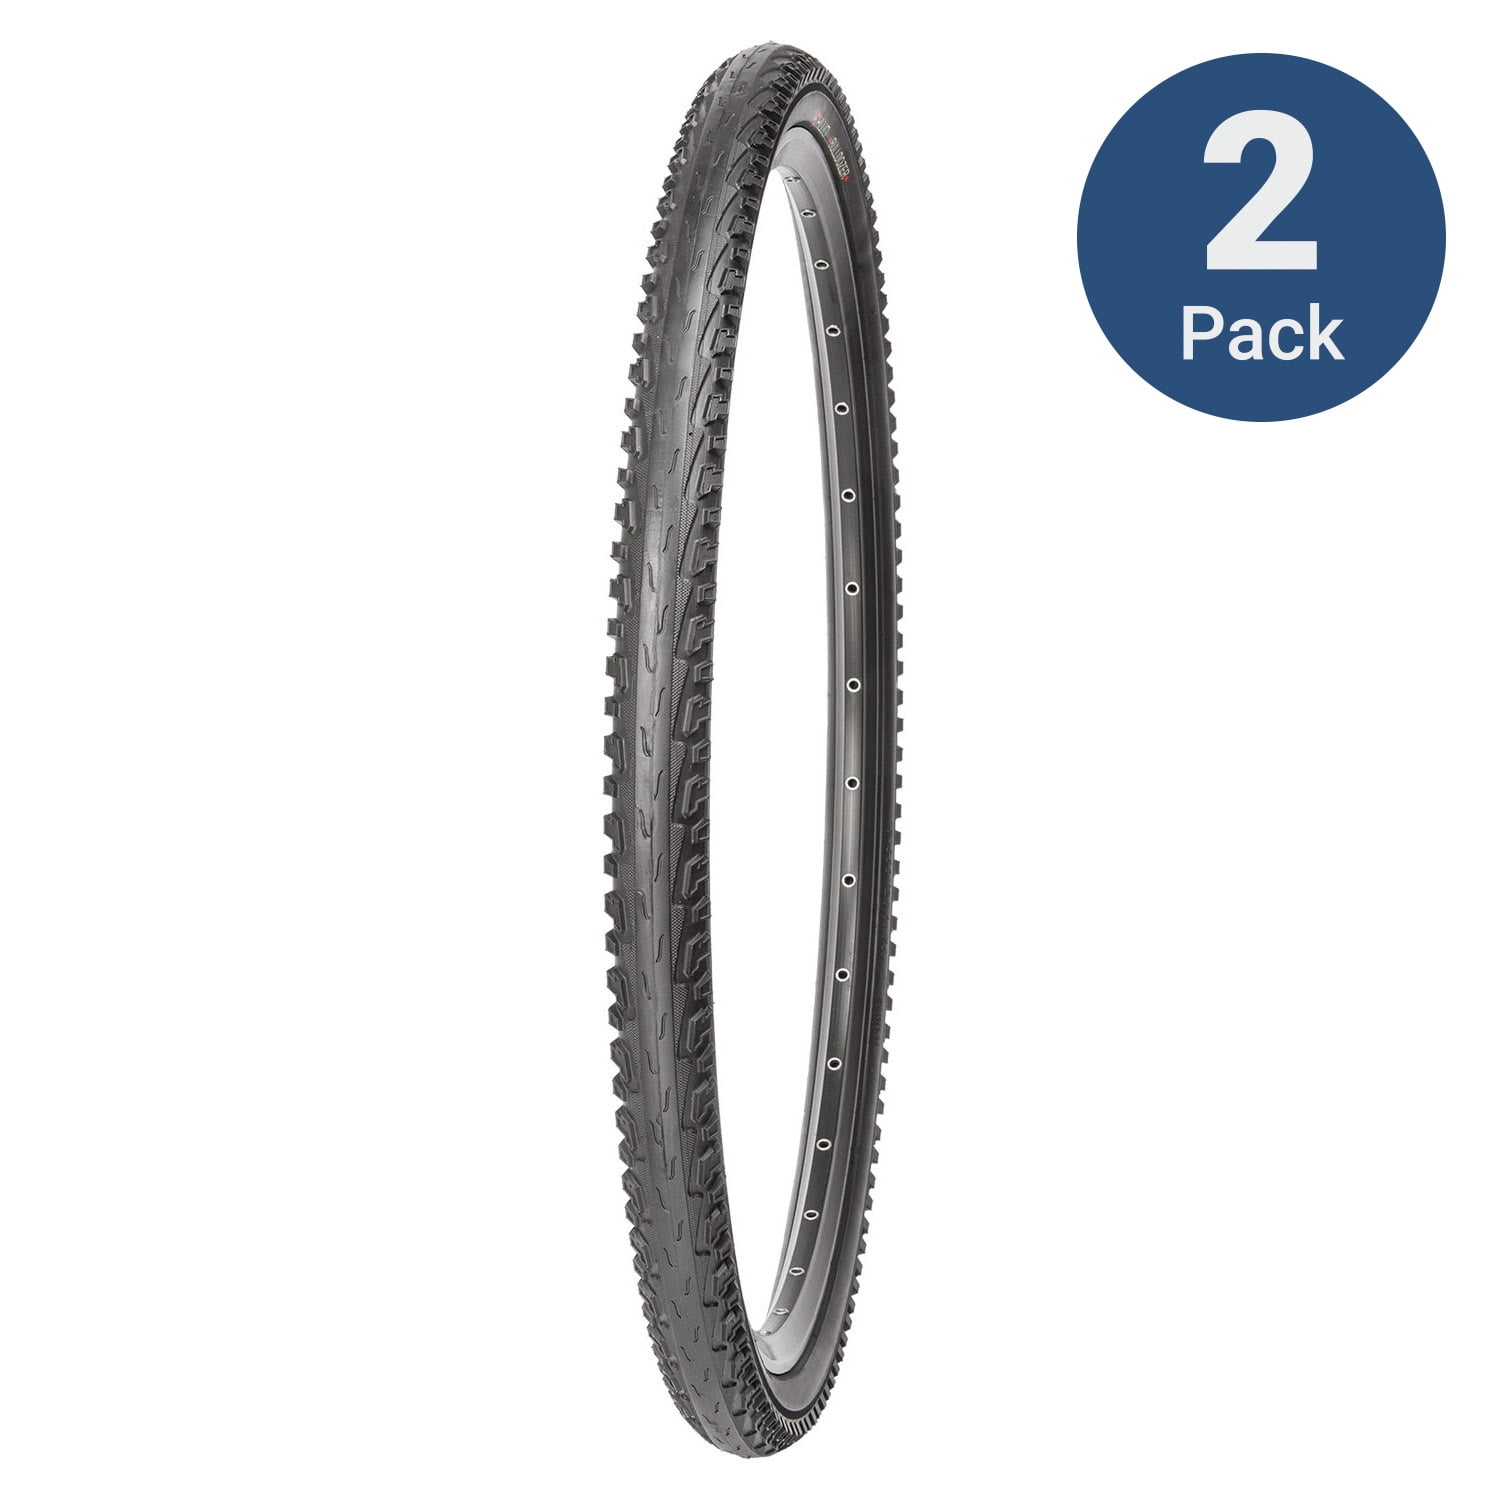 2 NEW 26'' X 1.75 BLK/GUM-WALL BICYCLE TIRES, 2 TUBES & LINERS FOR MTB, 